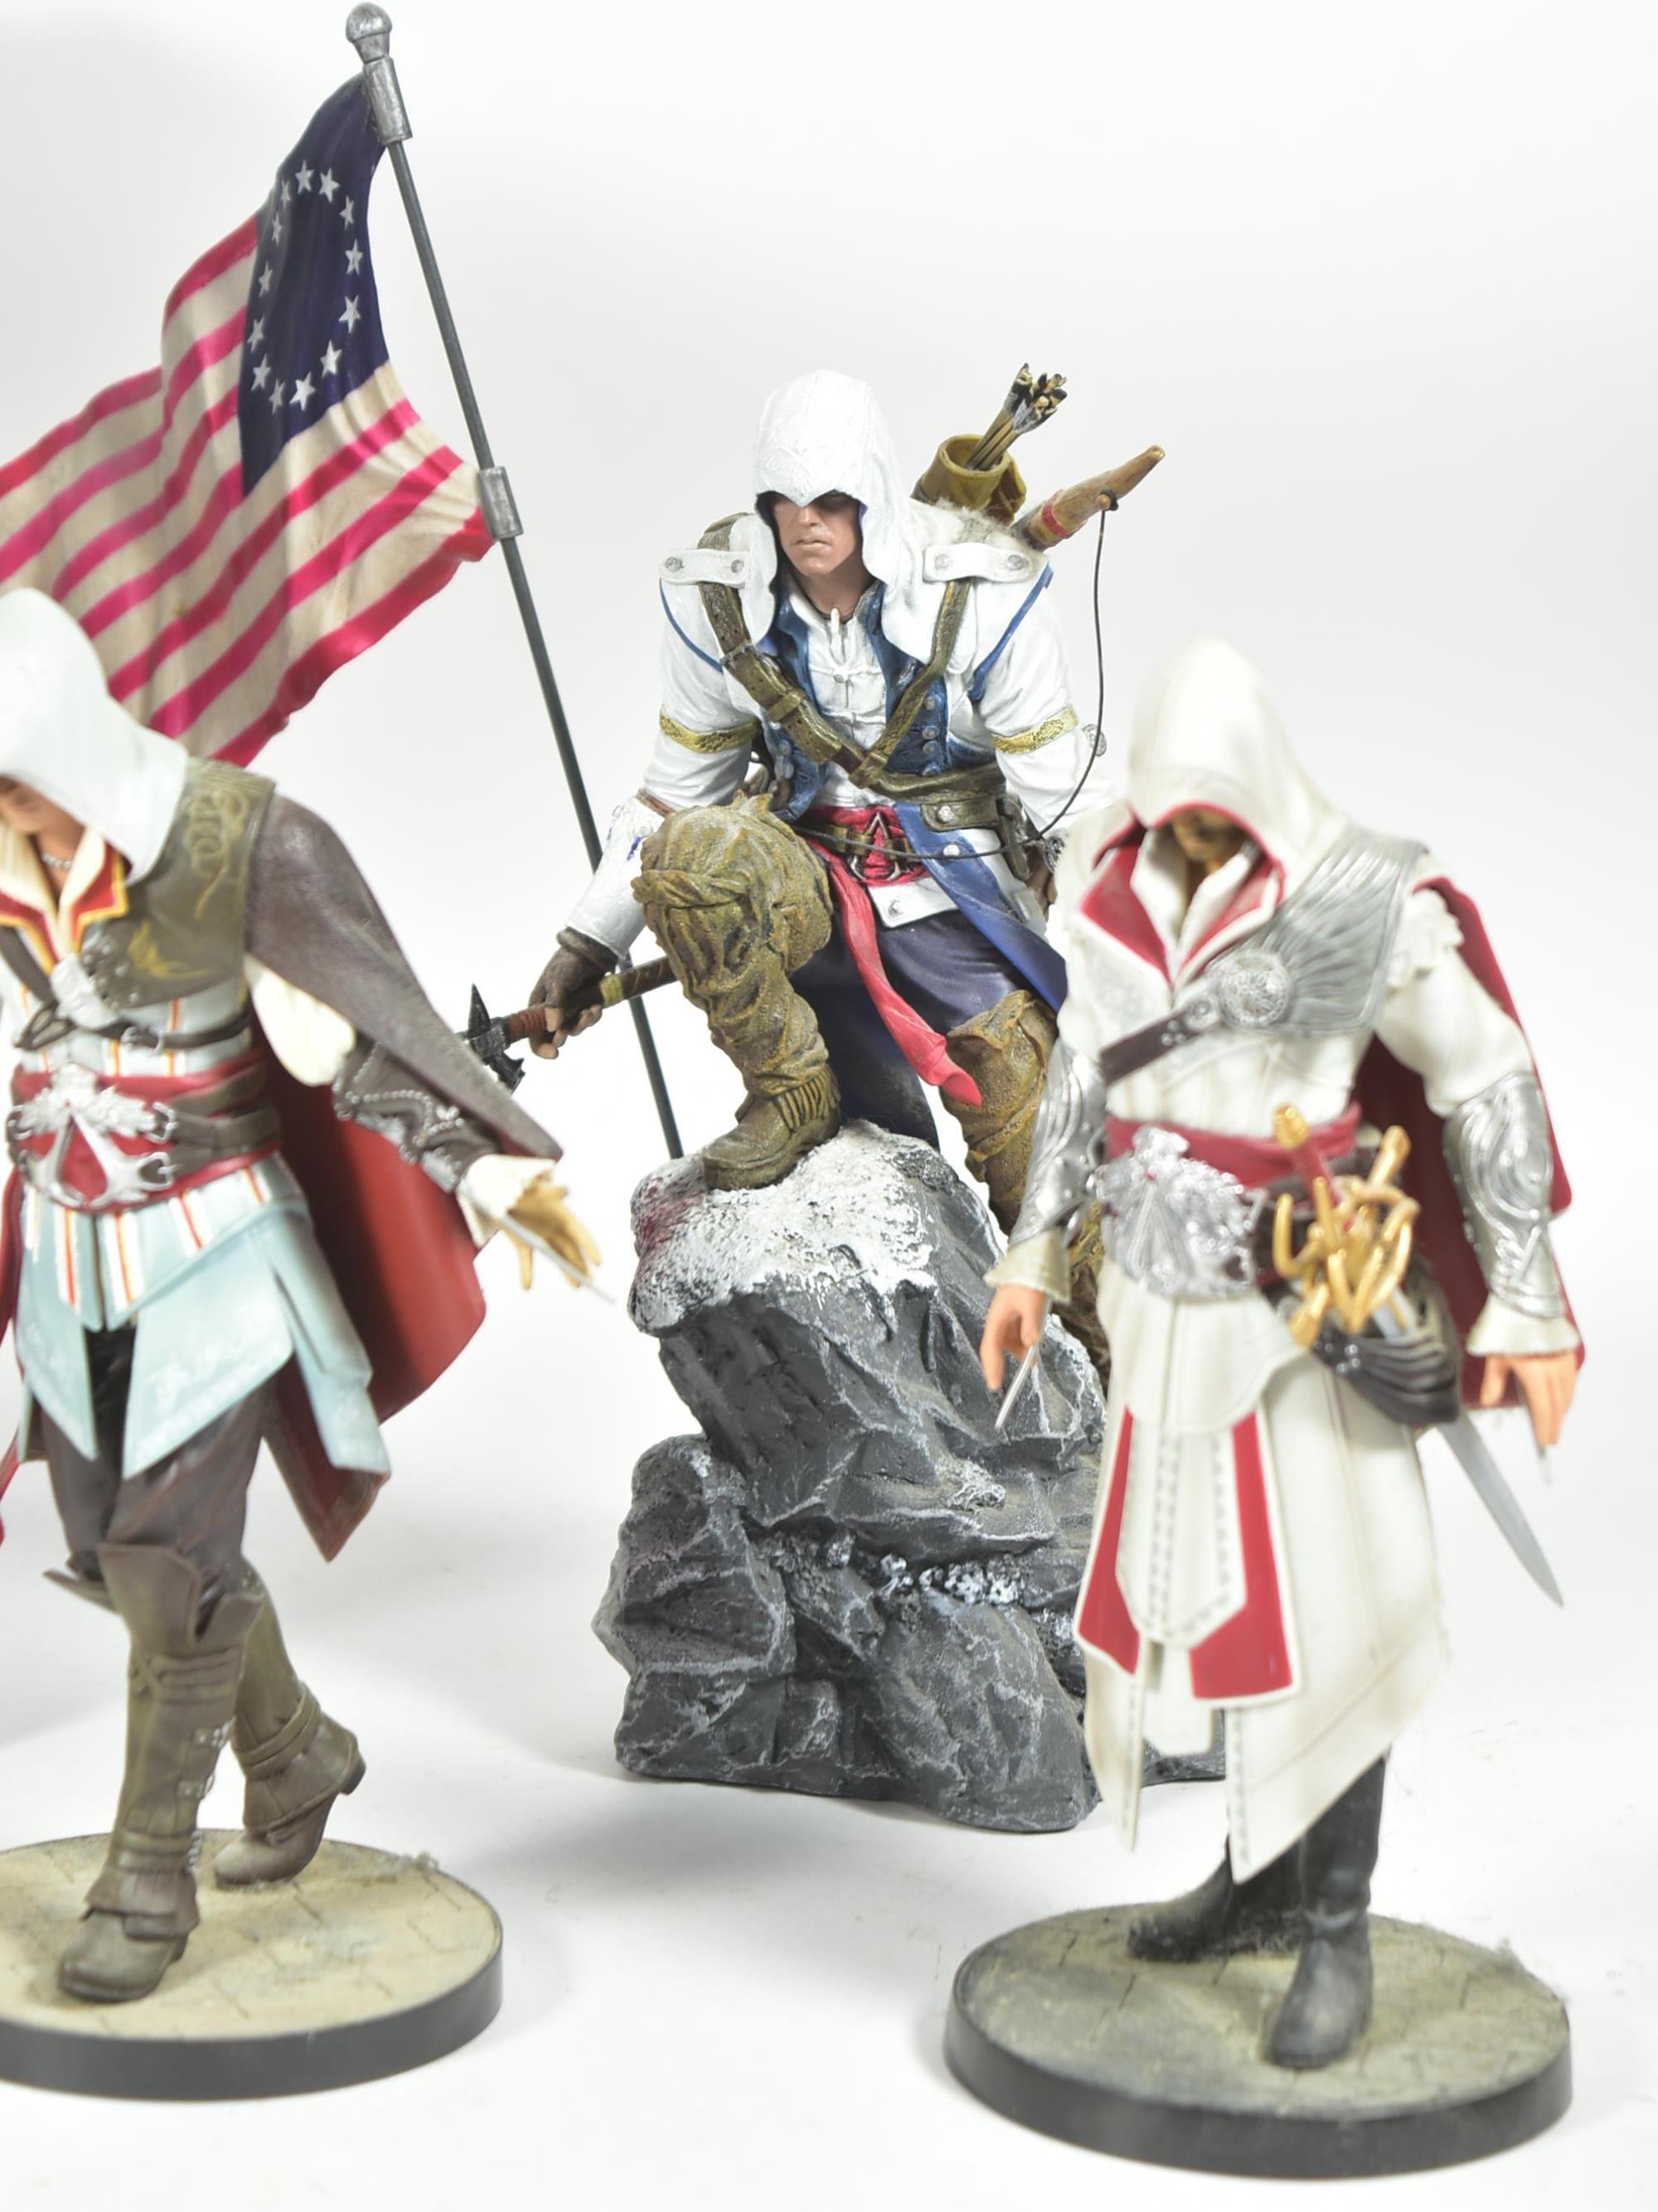 ASSASSINS CREED - UBI COLLECIBLES FIGURINES - Image 4 of 6